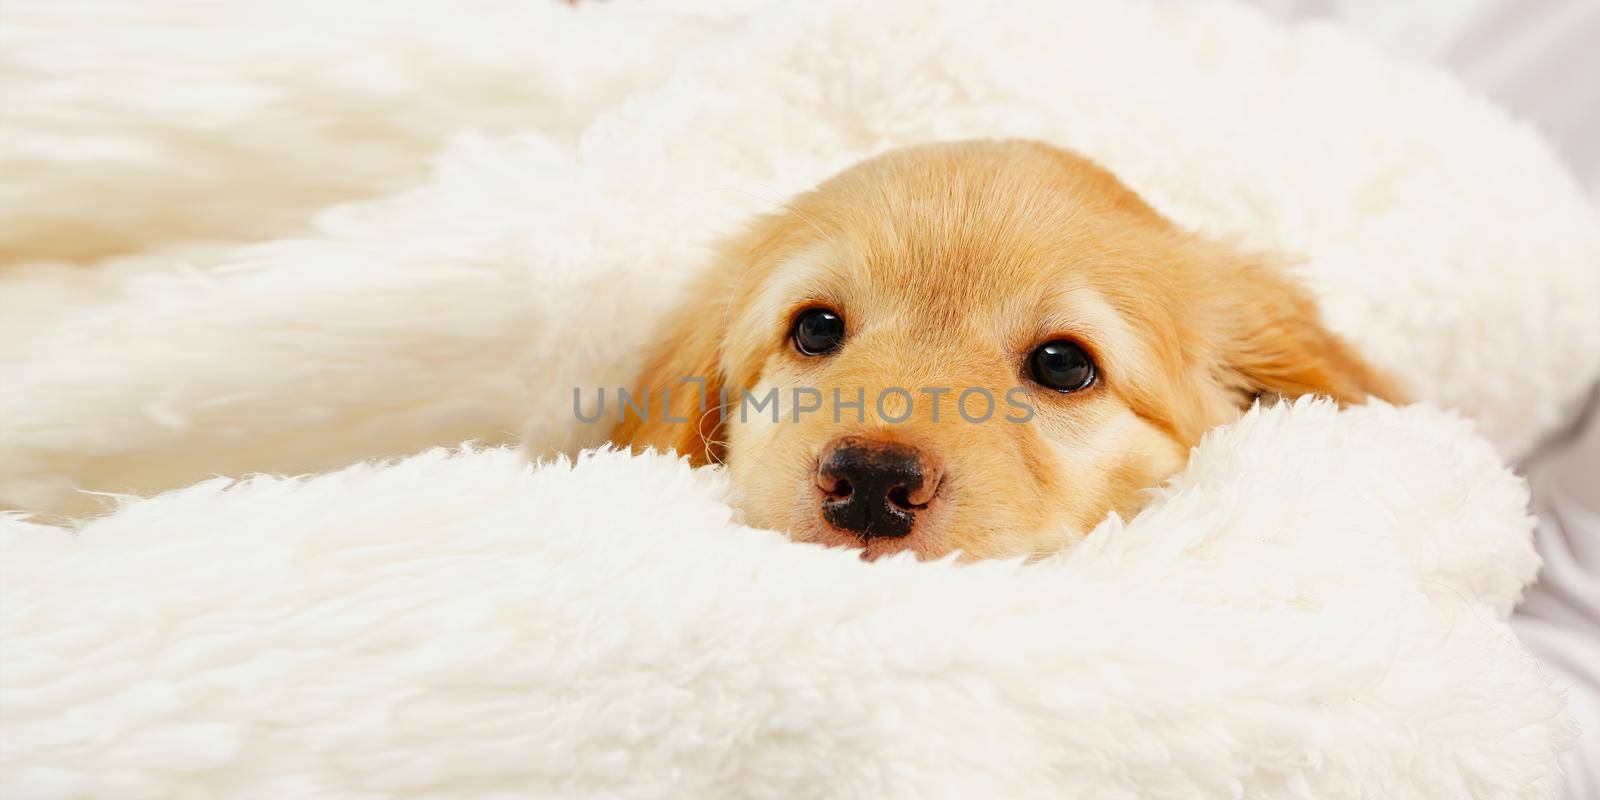 A child with a cute puppy. Girl with a golden hovawart puppy at home. cute little guard puppy. Golden Retriever pup.